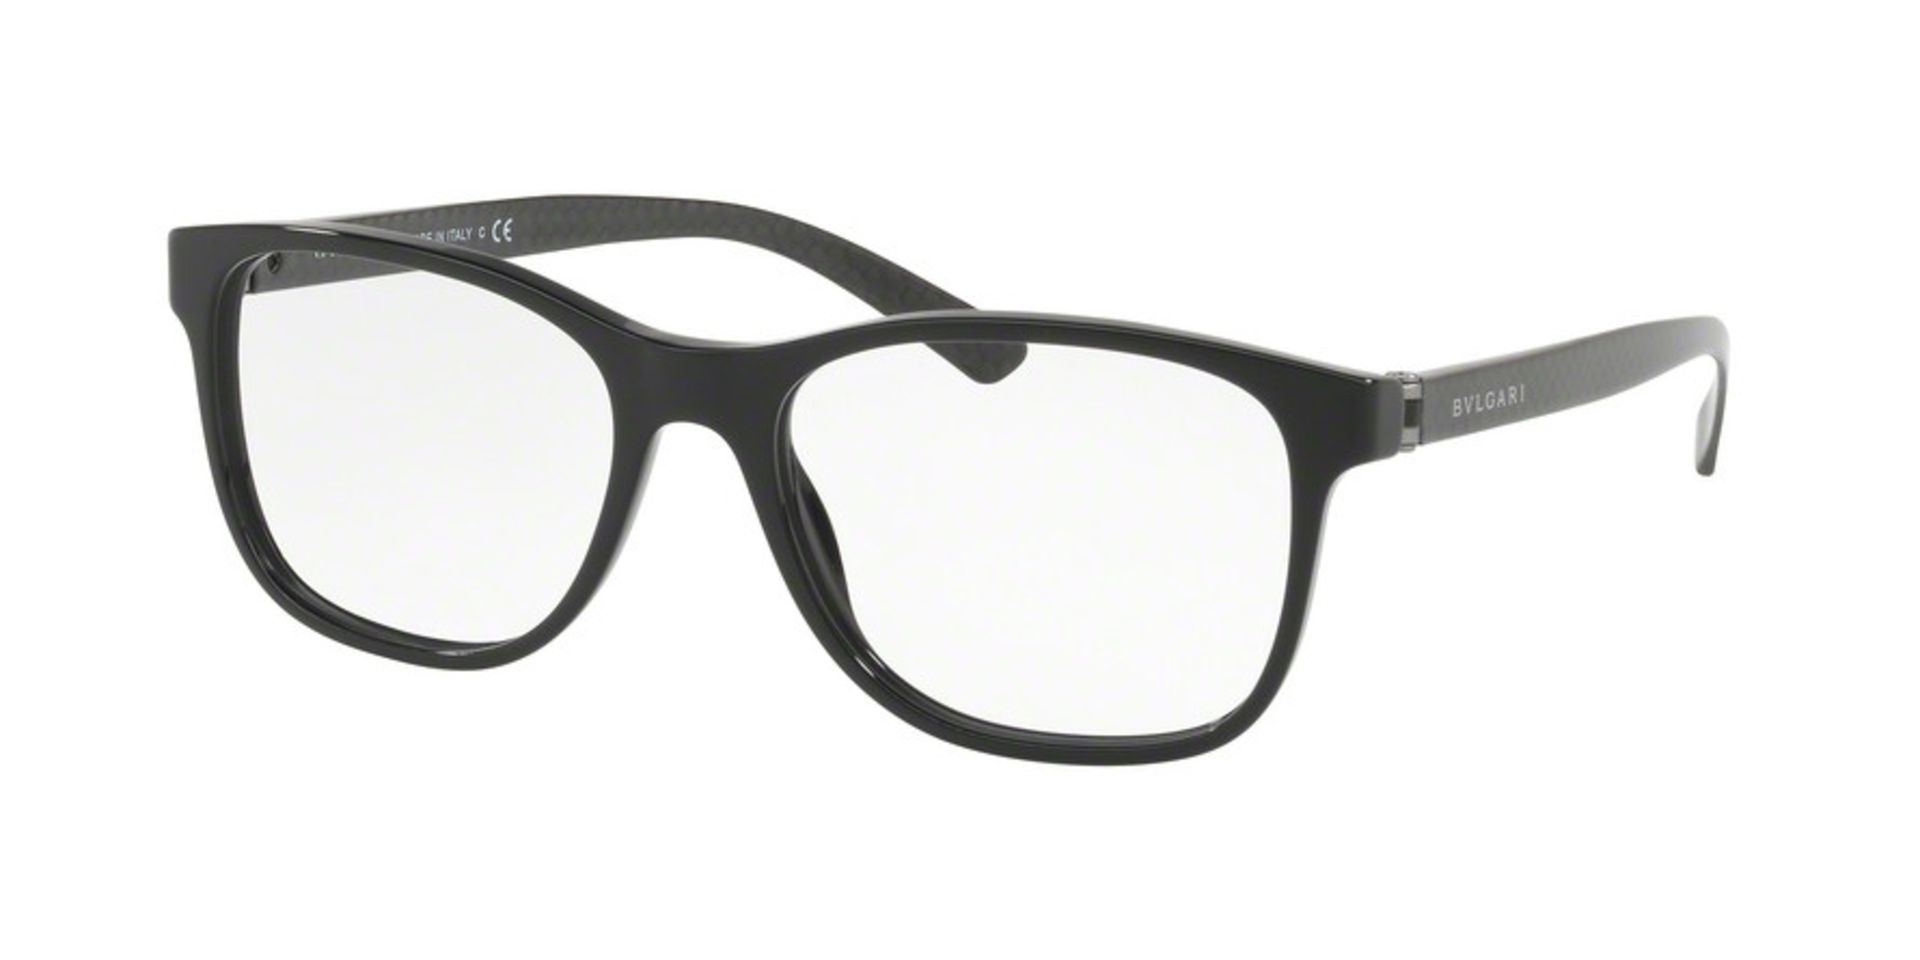 Bvlgari Gents Spectacle Frames with Original Case - Ex Demo or Return Stock from Private Jet Char...